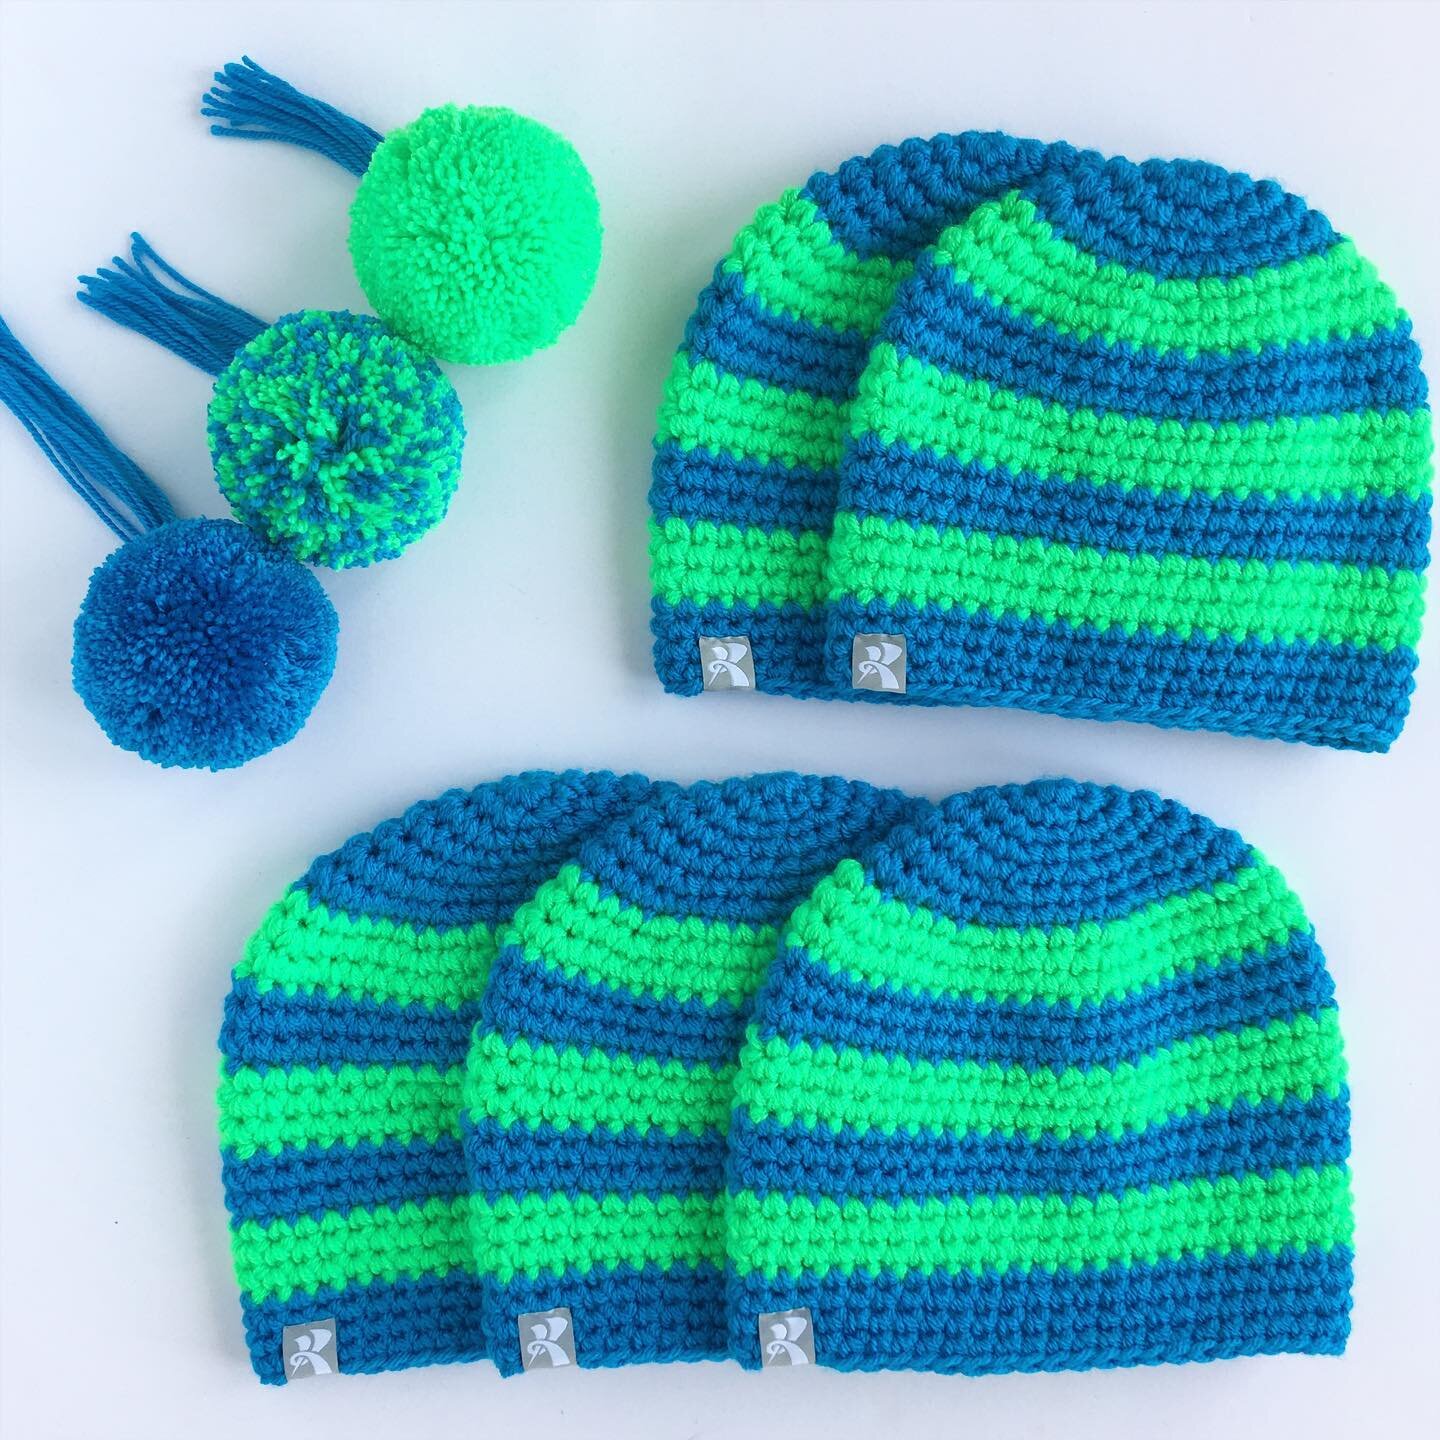 Beanies done and shipped!

I made an extra beanie which I plan to give away with the pompom of winner&rsquo;s choice. 💙💚 Watch this space 👀 
www.kbeanies.com

__________________________________✍️
#designyourown #neon #custombeanie #stripes #design